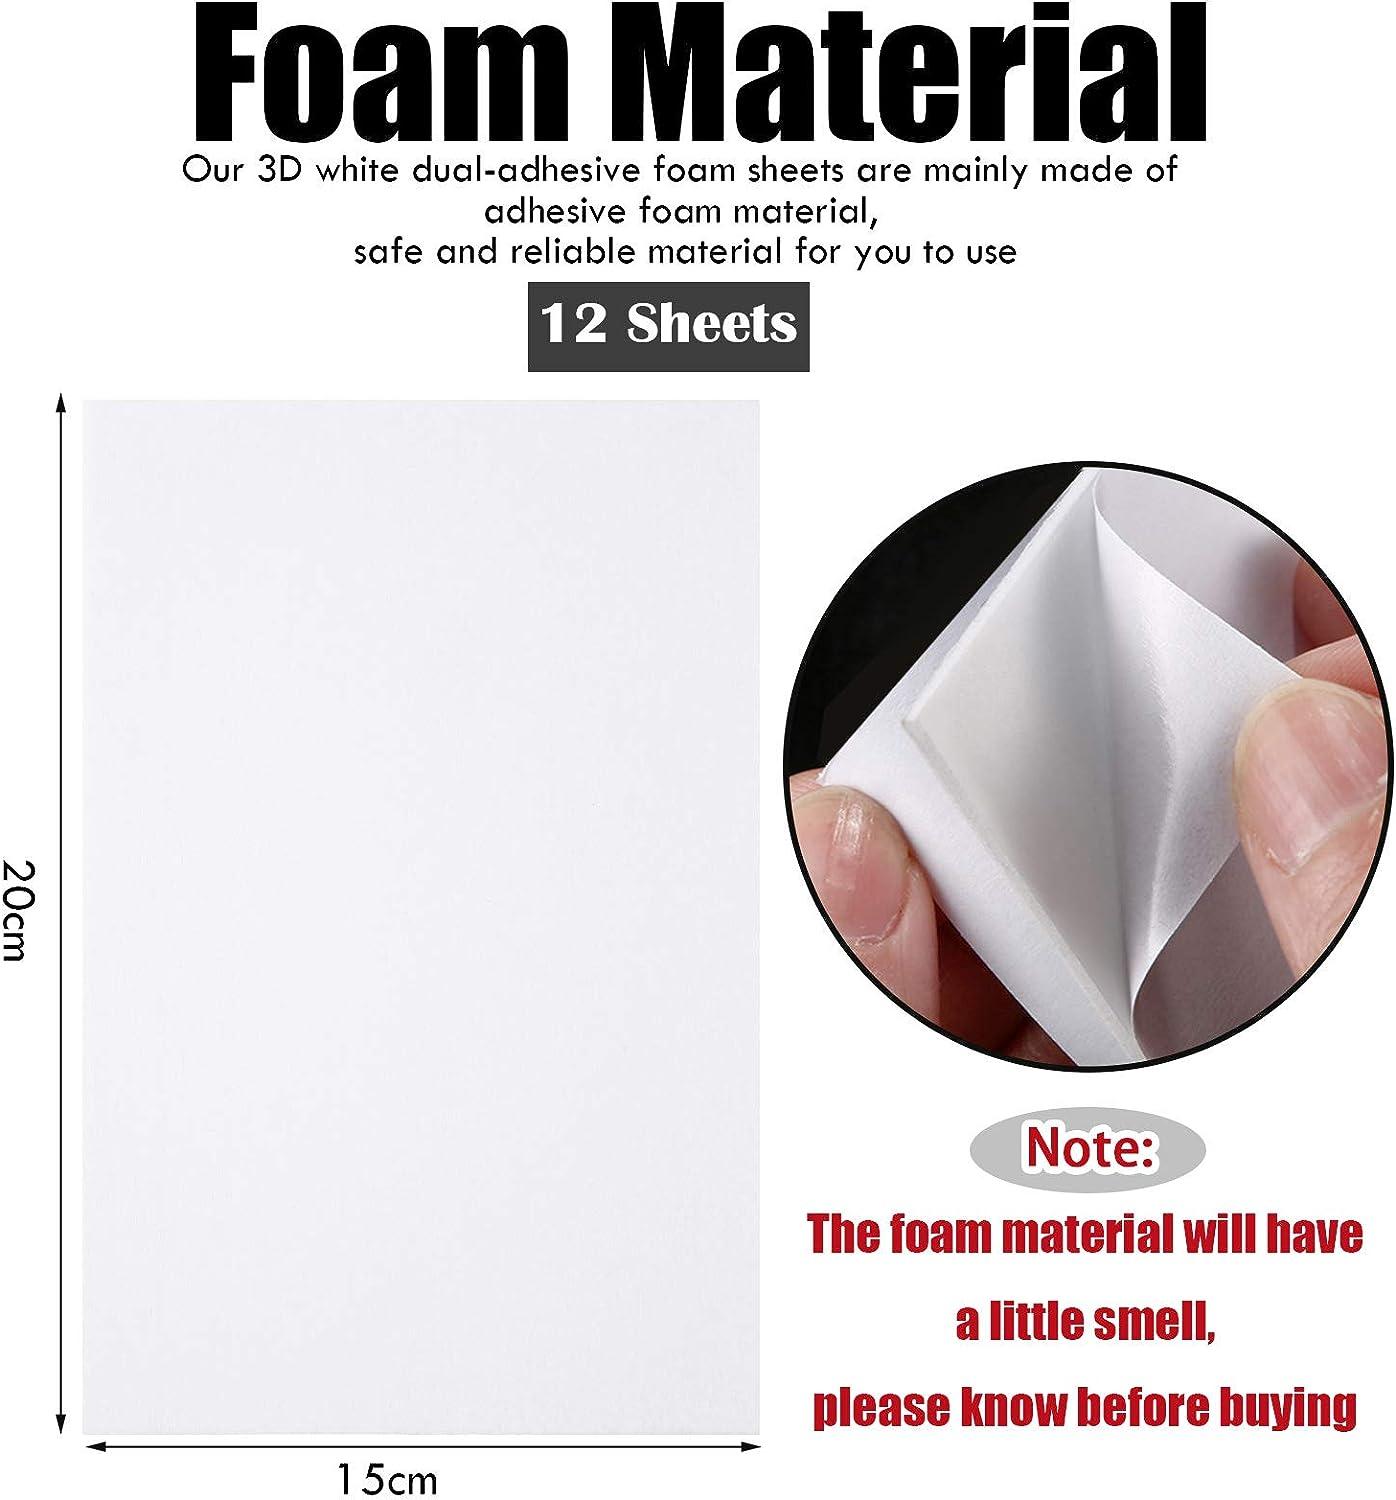 12 Sheets Sticky Foam Sheets Double Sided Adhesive Foam Sheets 3D White  Dual-Adhesive Foam Sheets for Shaker Cards Scrapbooking Crafting (7.9 x 5.9  Inch)